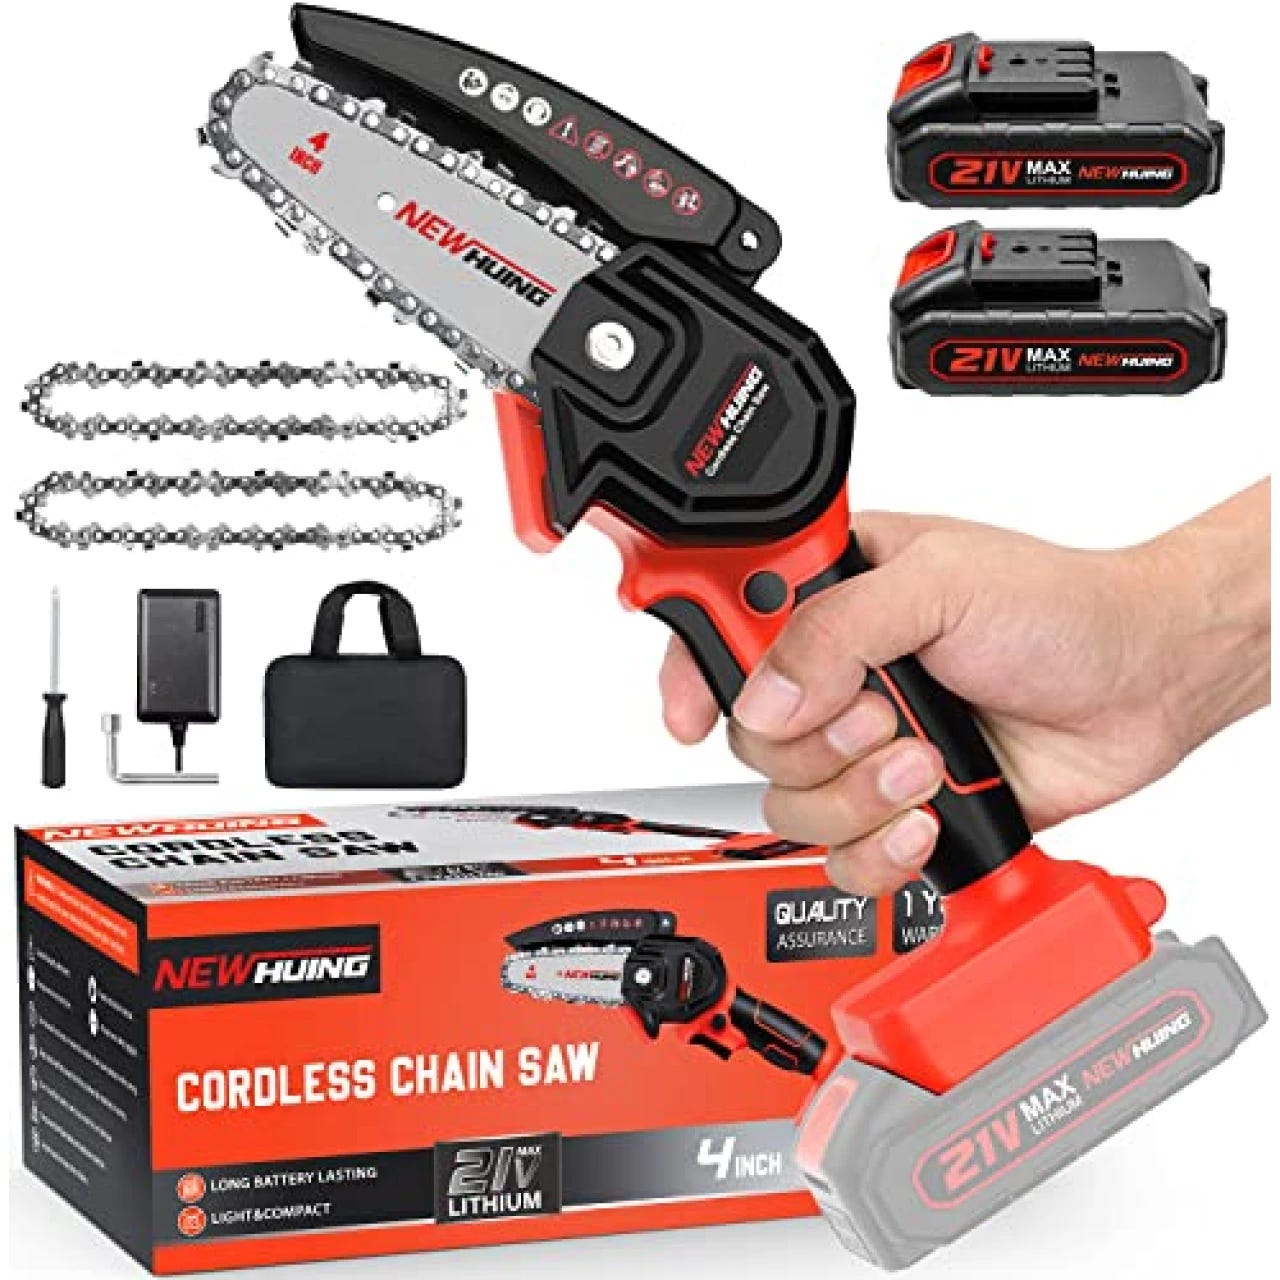 This mini chainsaw 'works like a charm' — and it's only $58 on